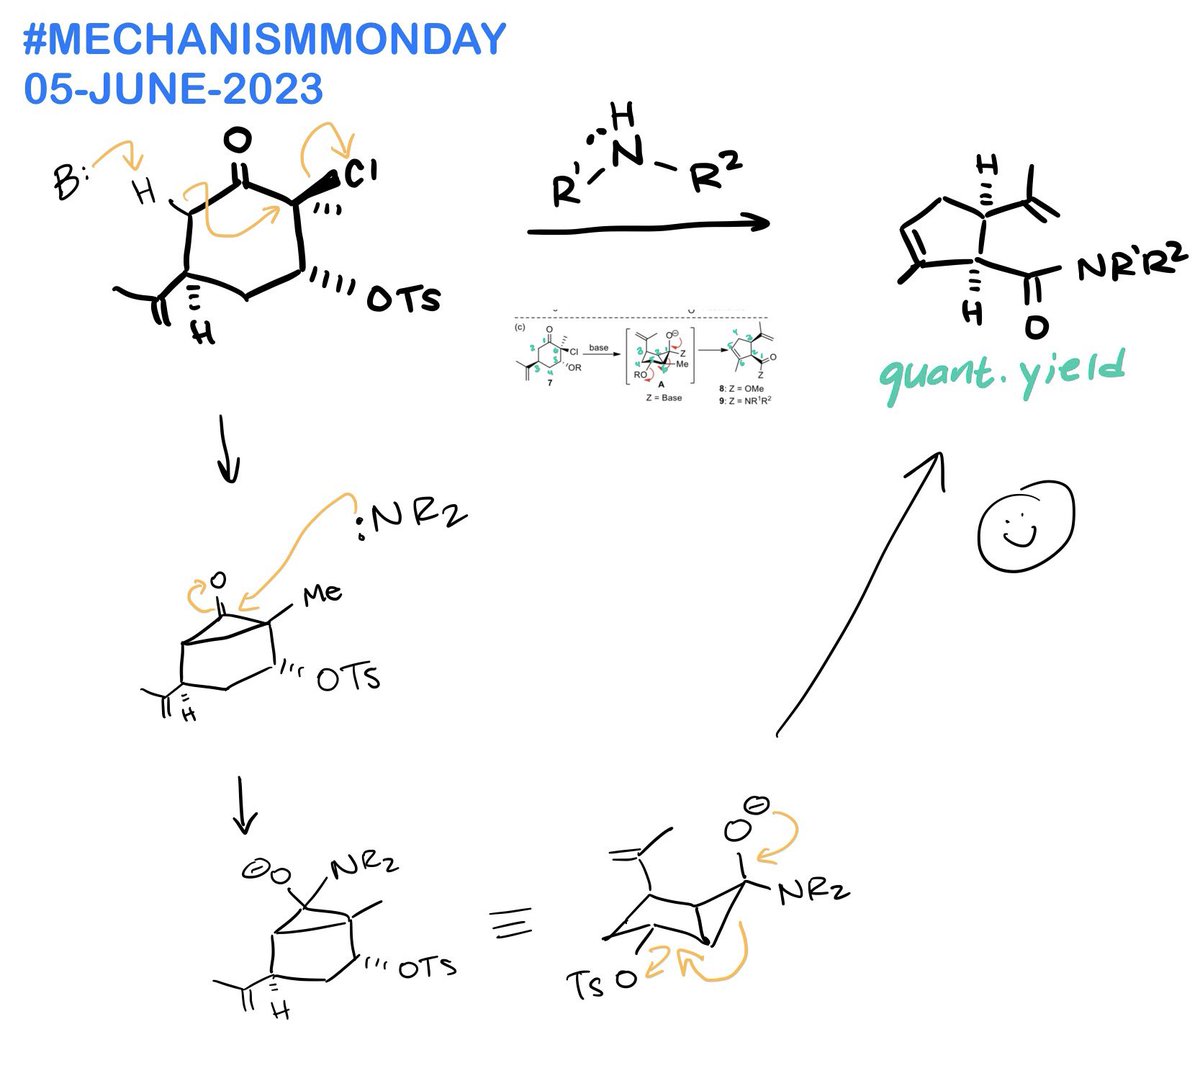 Alright y’all! @Kitspiroplatin got this one already, but here’s the official answer. From a very nice 2022 OrgLett by Hajra and Maity. (doi.org/10.1021/acs.or…) See you next week for another #MechanismMonday! 🤩🤩🤩